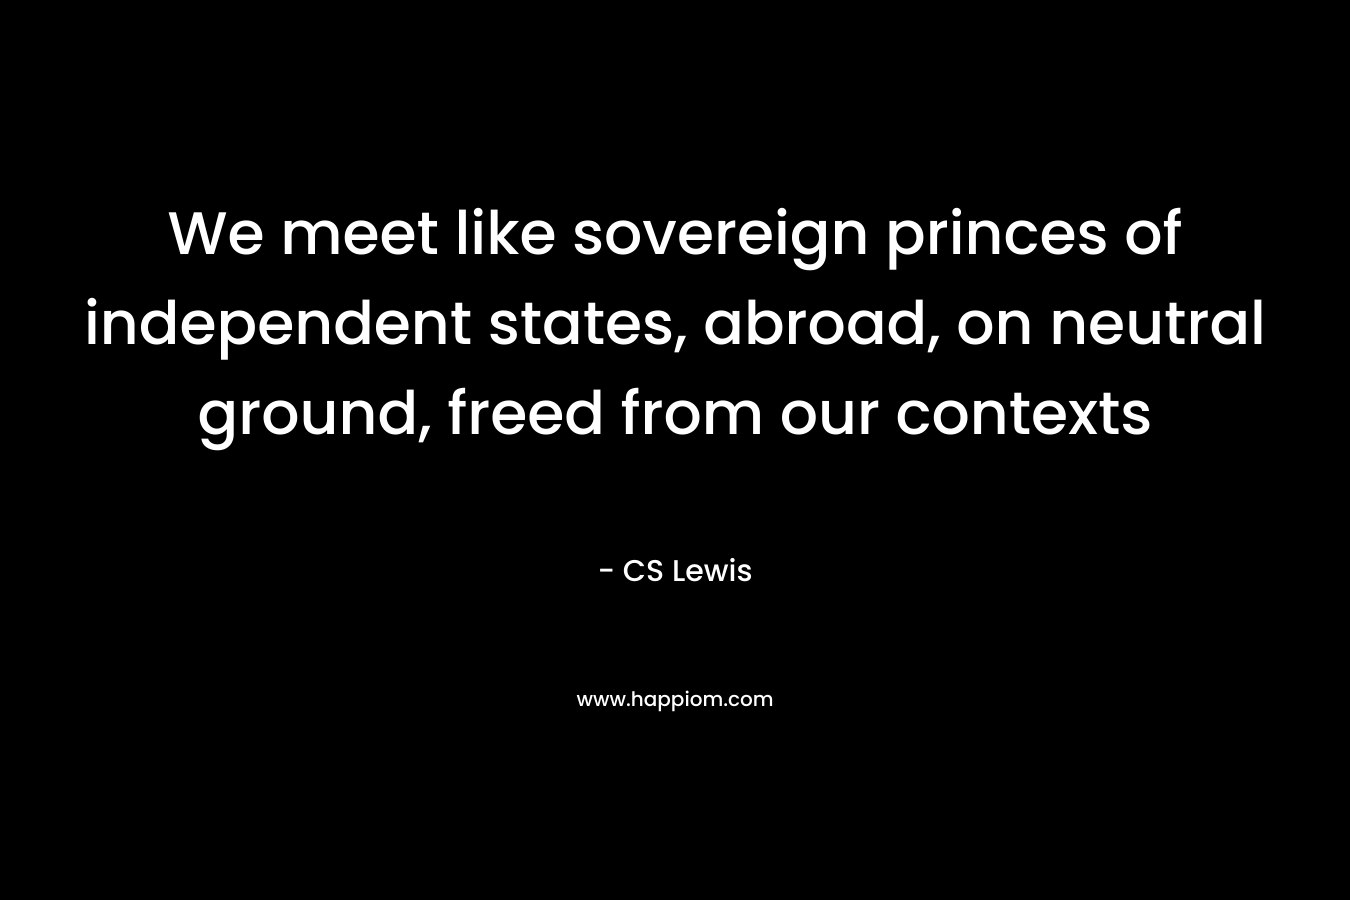 We meet like sovereign princes of independent states, abroad, on neutral ground, freed from our contexts – CS Lewis